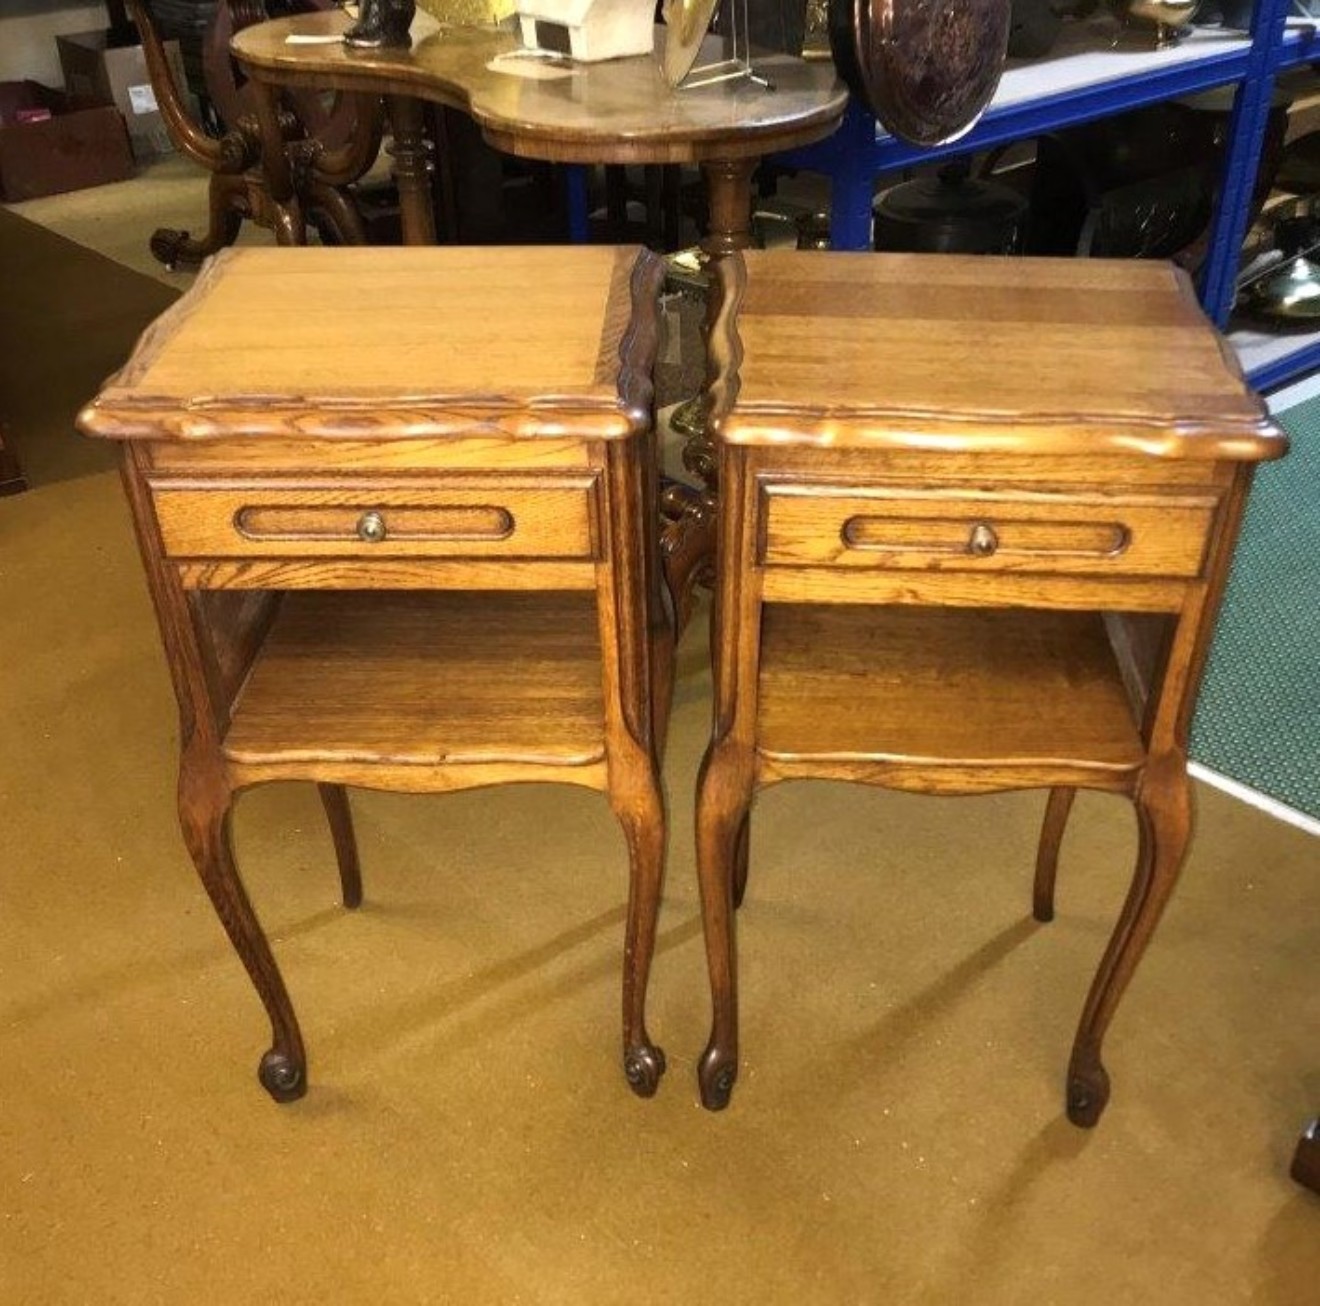 Vintage Pair of Louis XV Style French Oak Bedside Cabinets ﻿